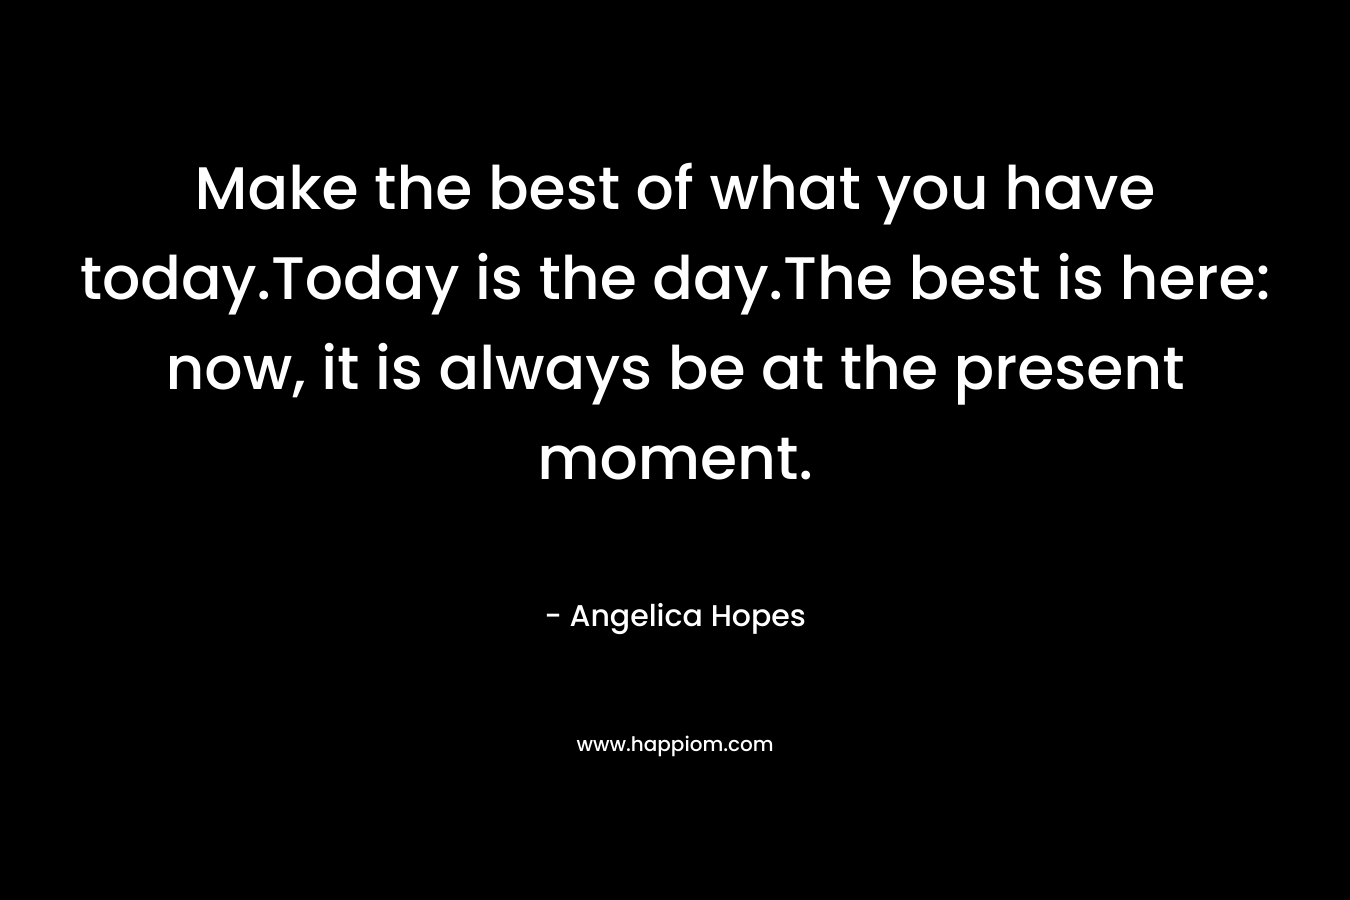 Make the best of what you have today.Today is the day.The best is here: now, it is always be at the present moment. – Angelica Hopes